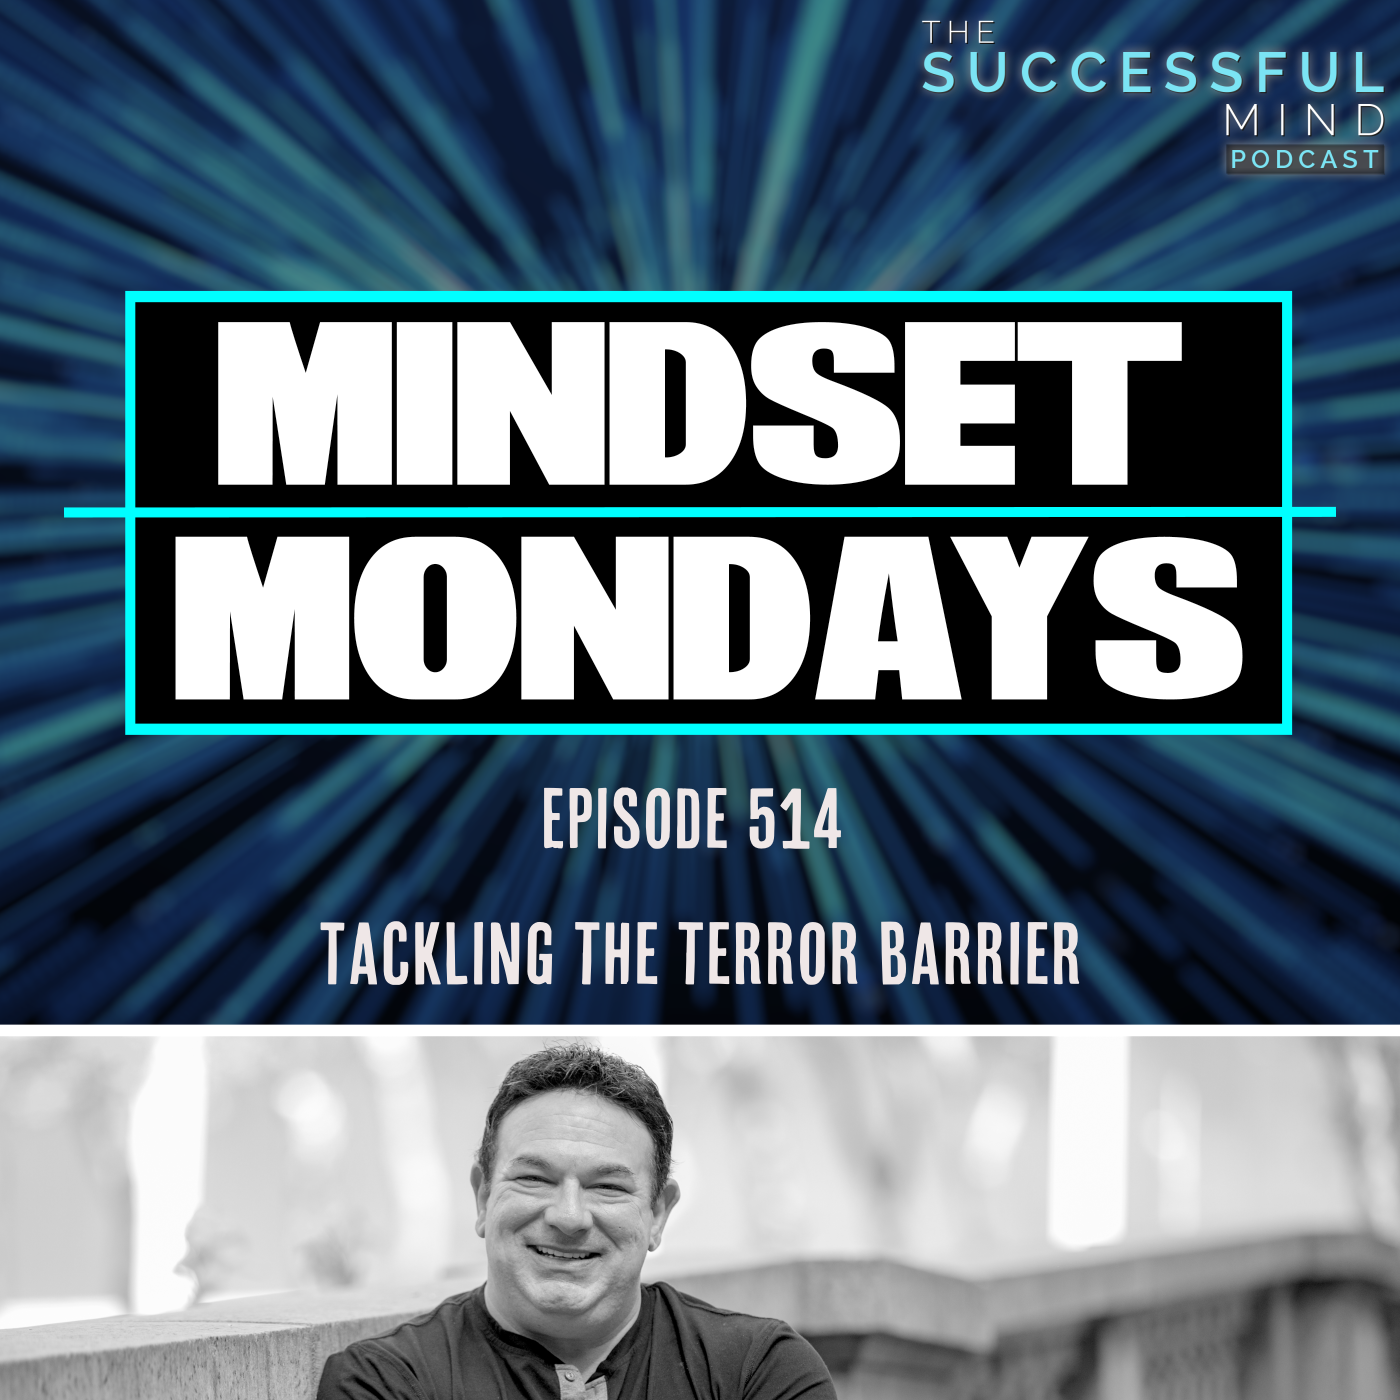 The Successful Mind Podcast – Episode 514 – Mindset Monday’s – Tackling The Terror Barrier